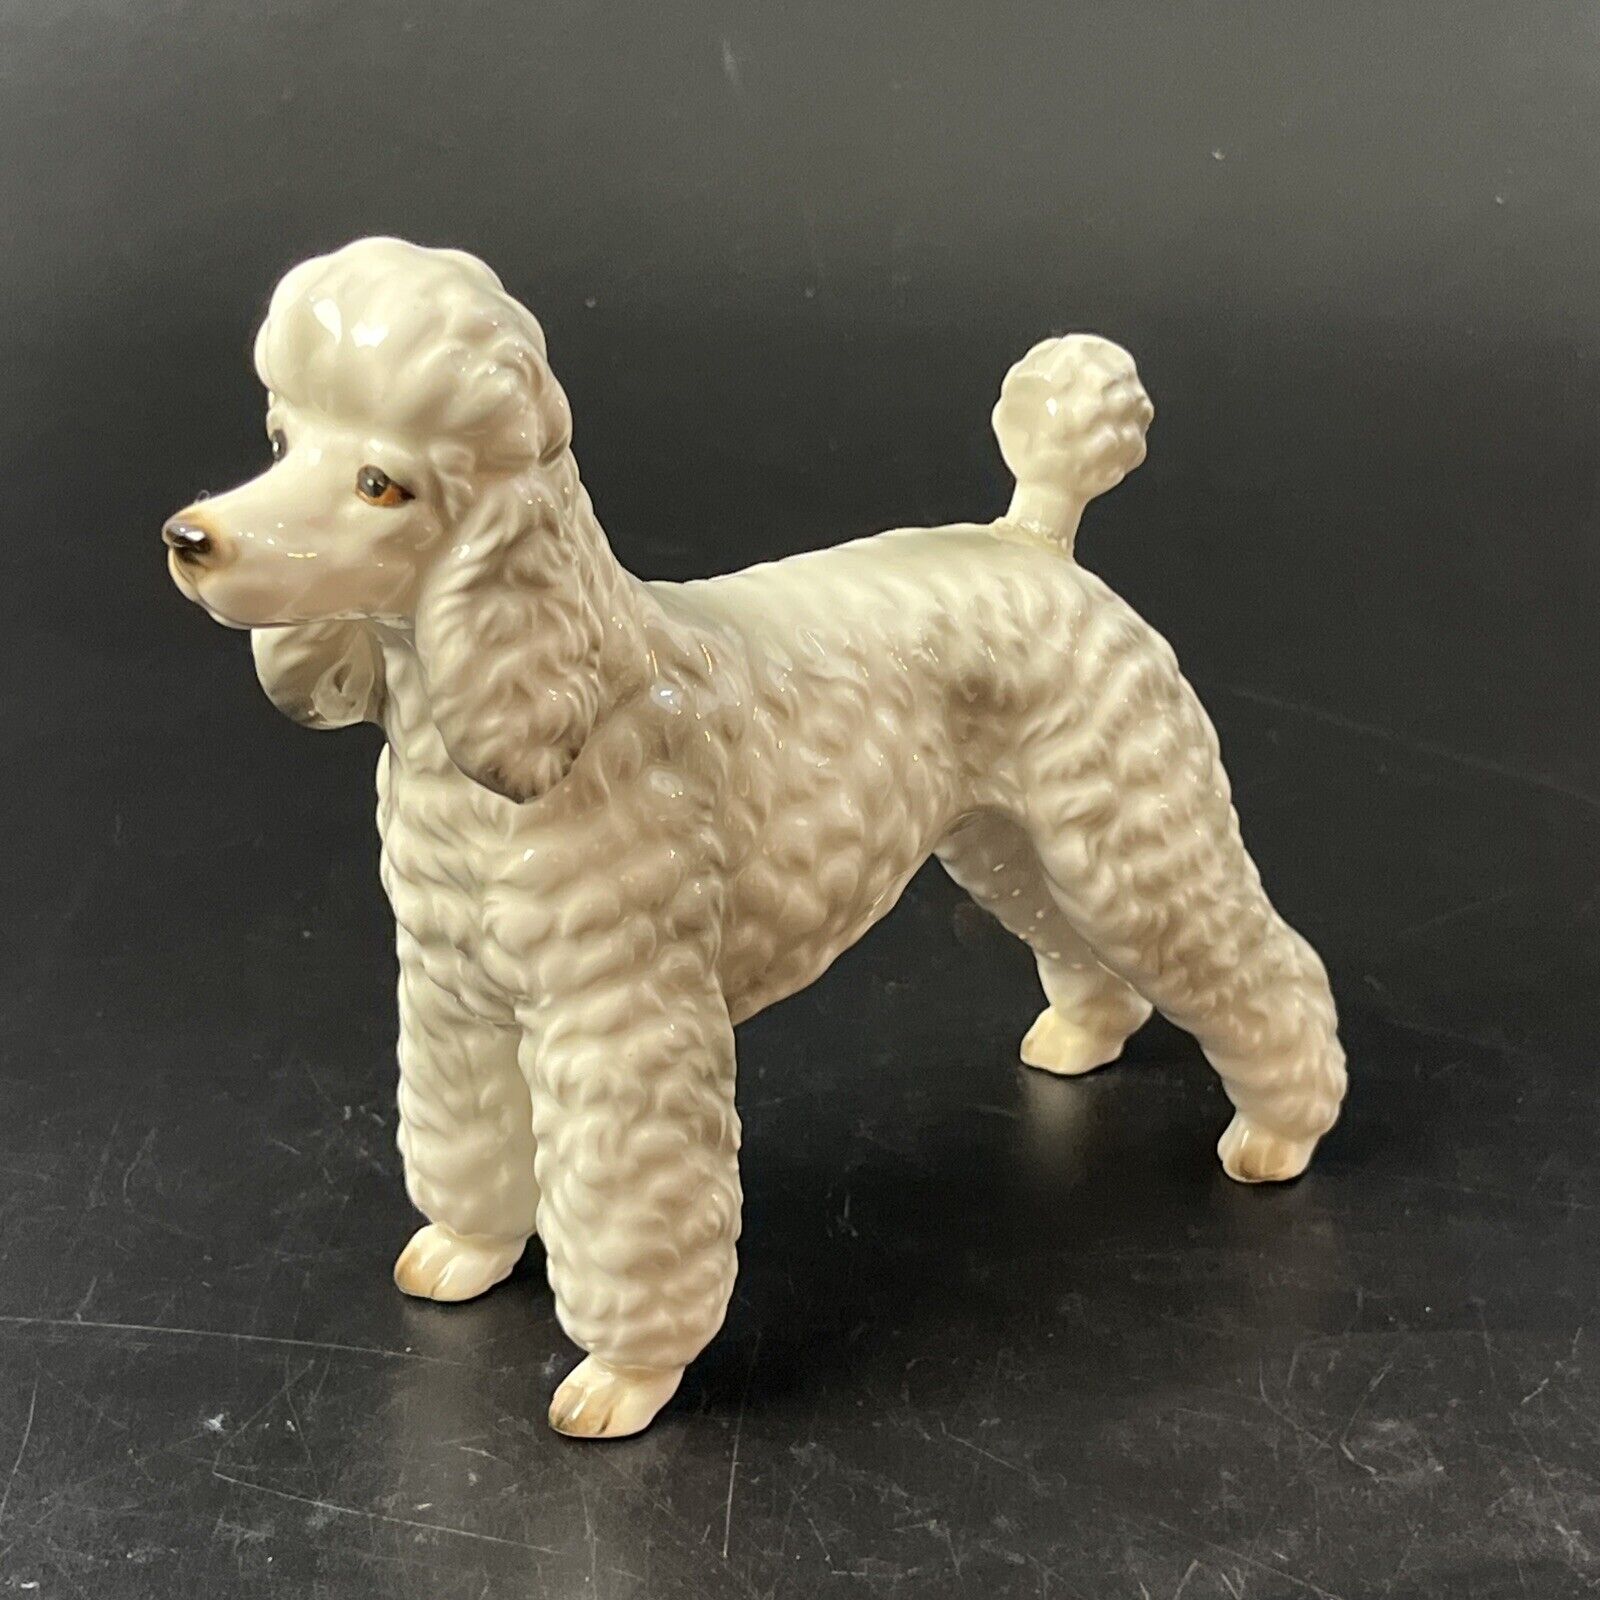 Shafford White Poodle Dog Figurine Japan Large Porcelain 7” Tall #169 (As Is)